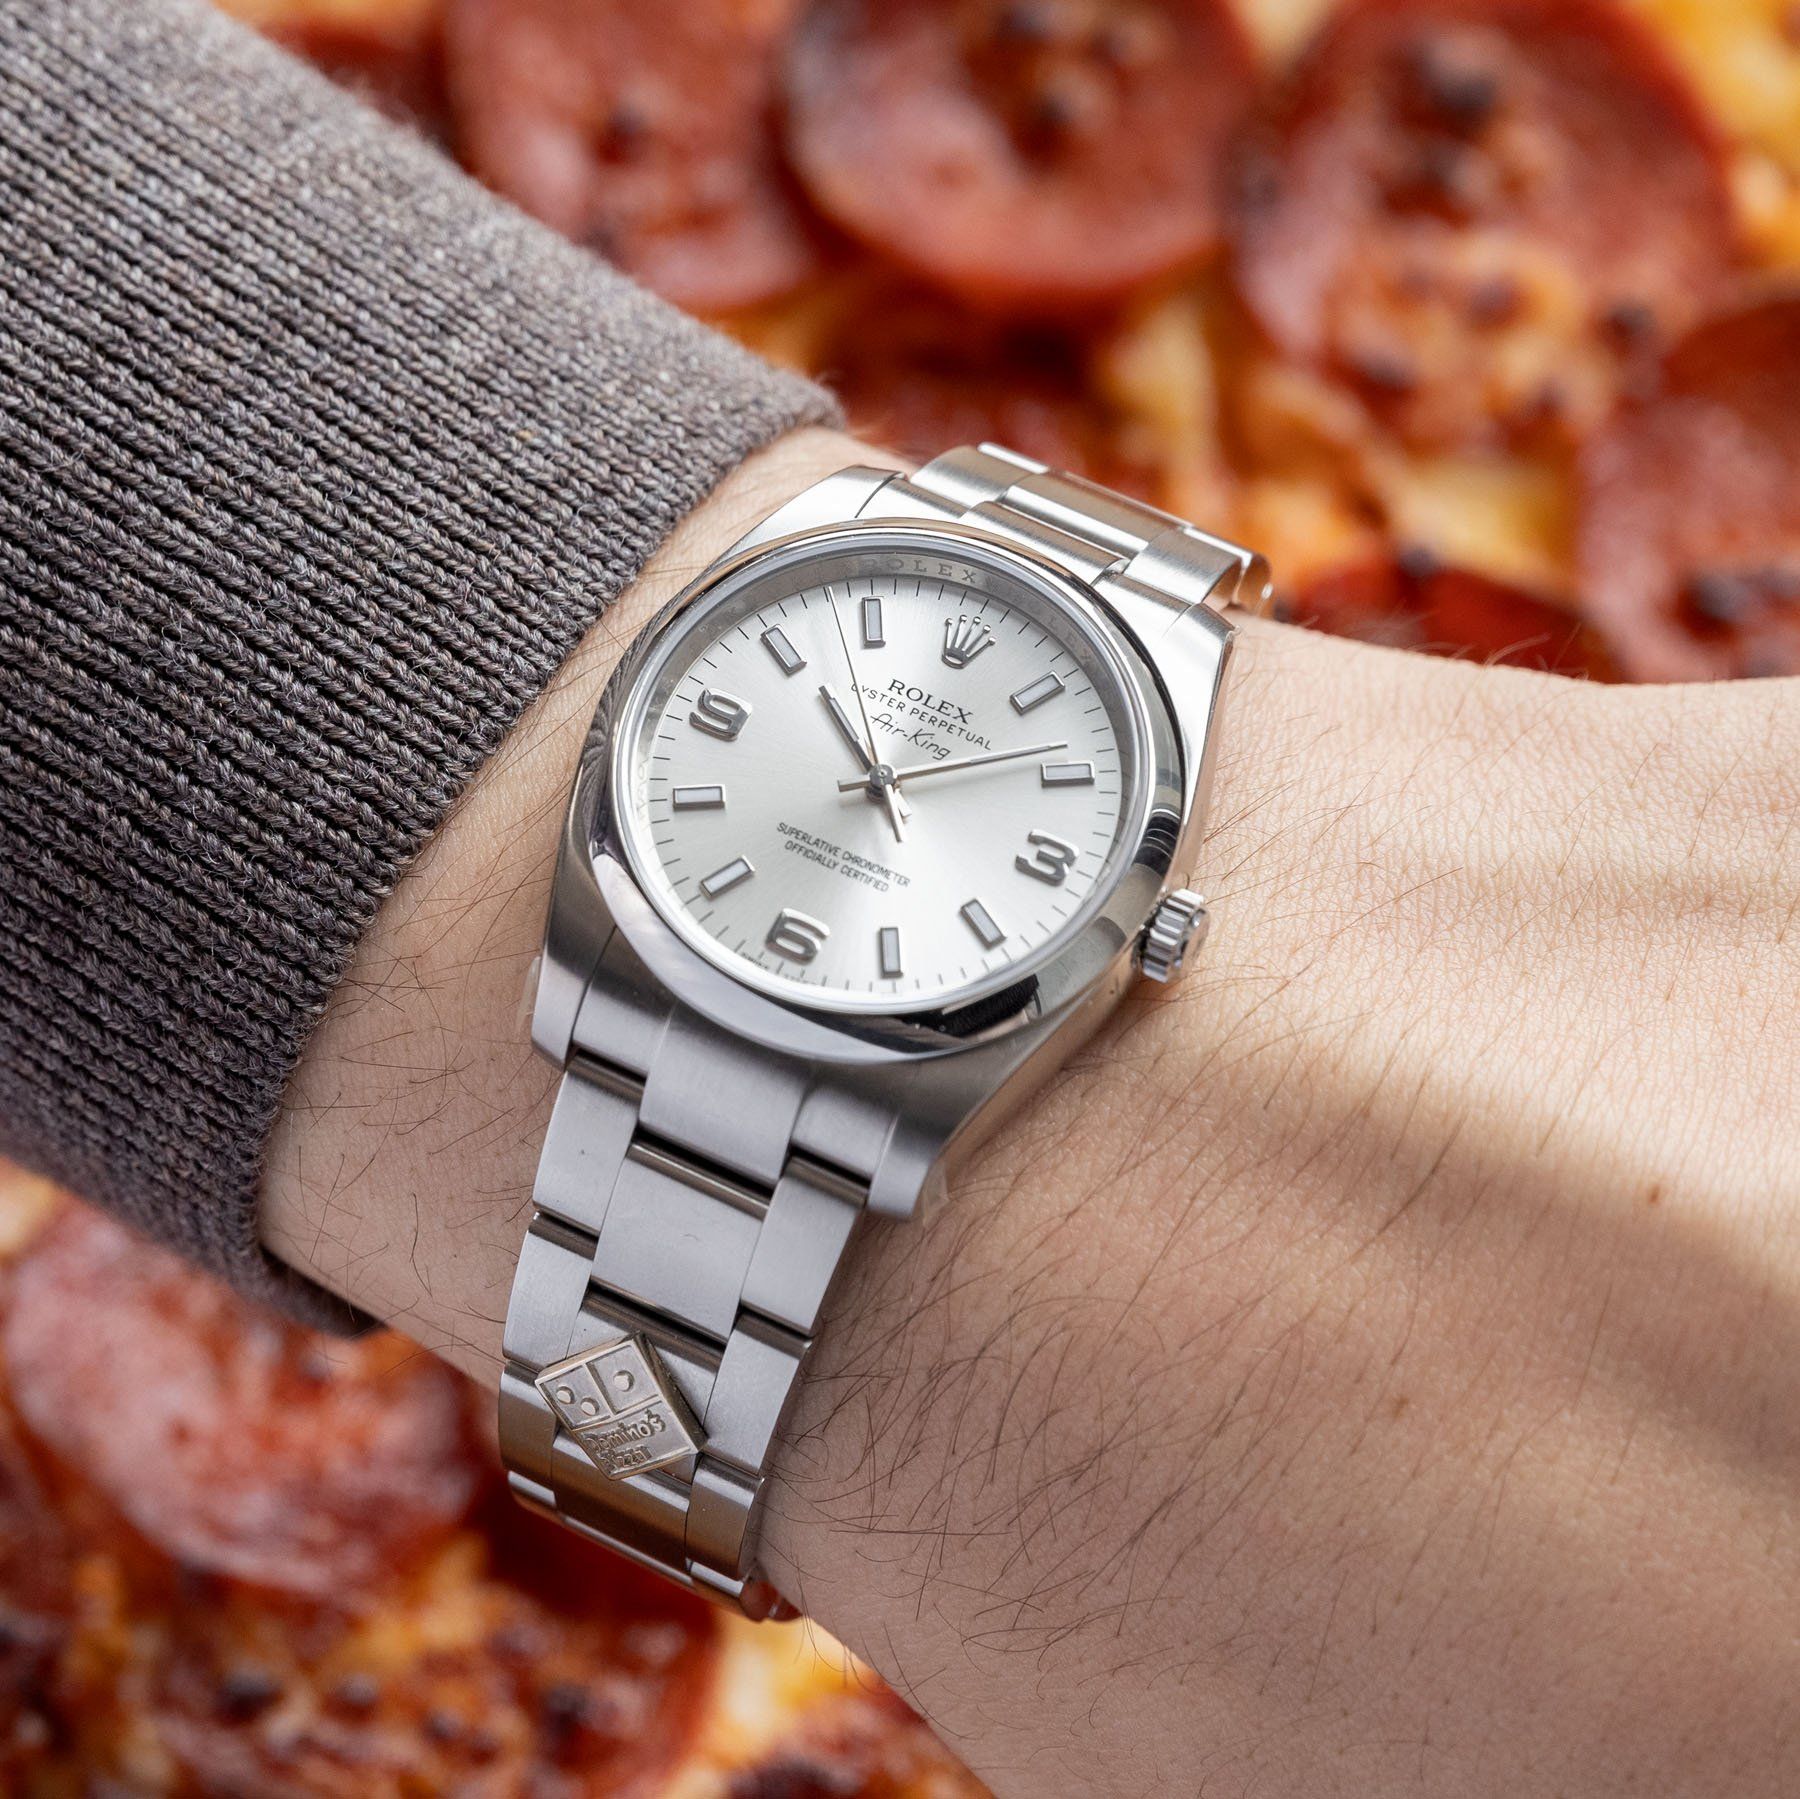 Rolex Air King Ref 114200 Domino’s Pizza NOS